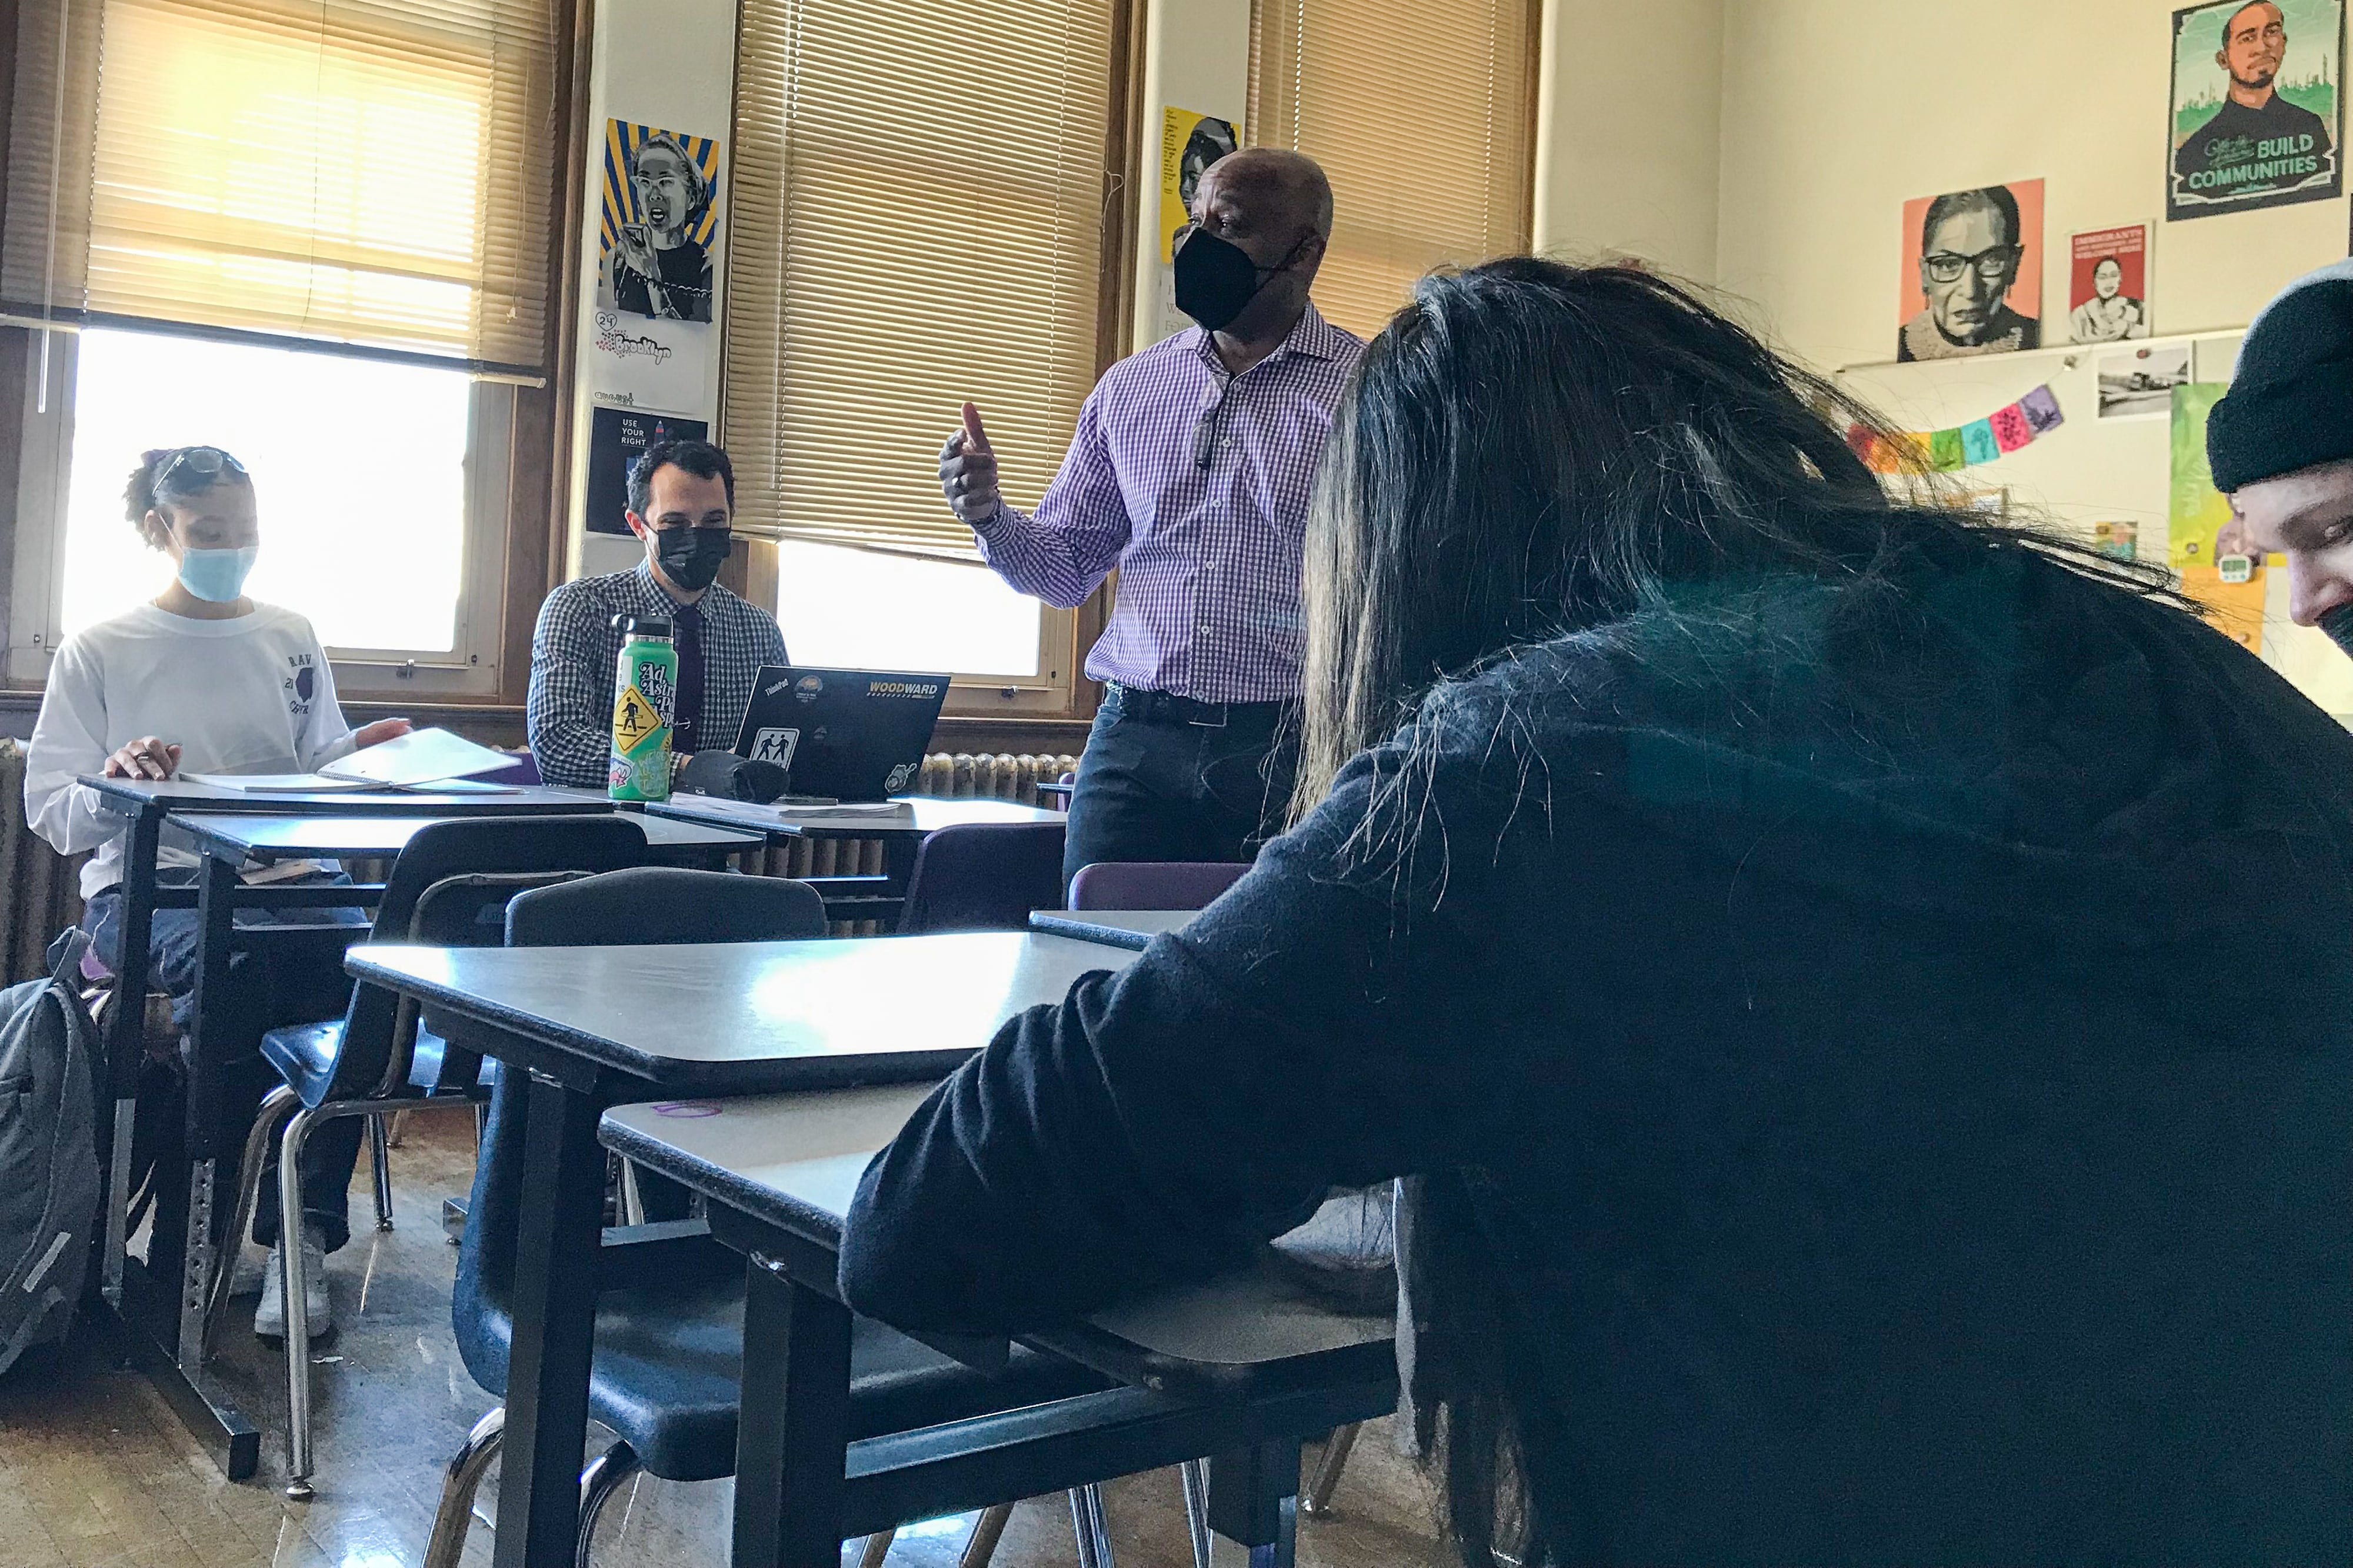 Denver Mayor Michael Hancock, wearing a purple and white shirt, teaches in a high school classroom while students listen. He’s wearing a face mask and gesturing.